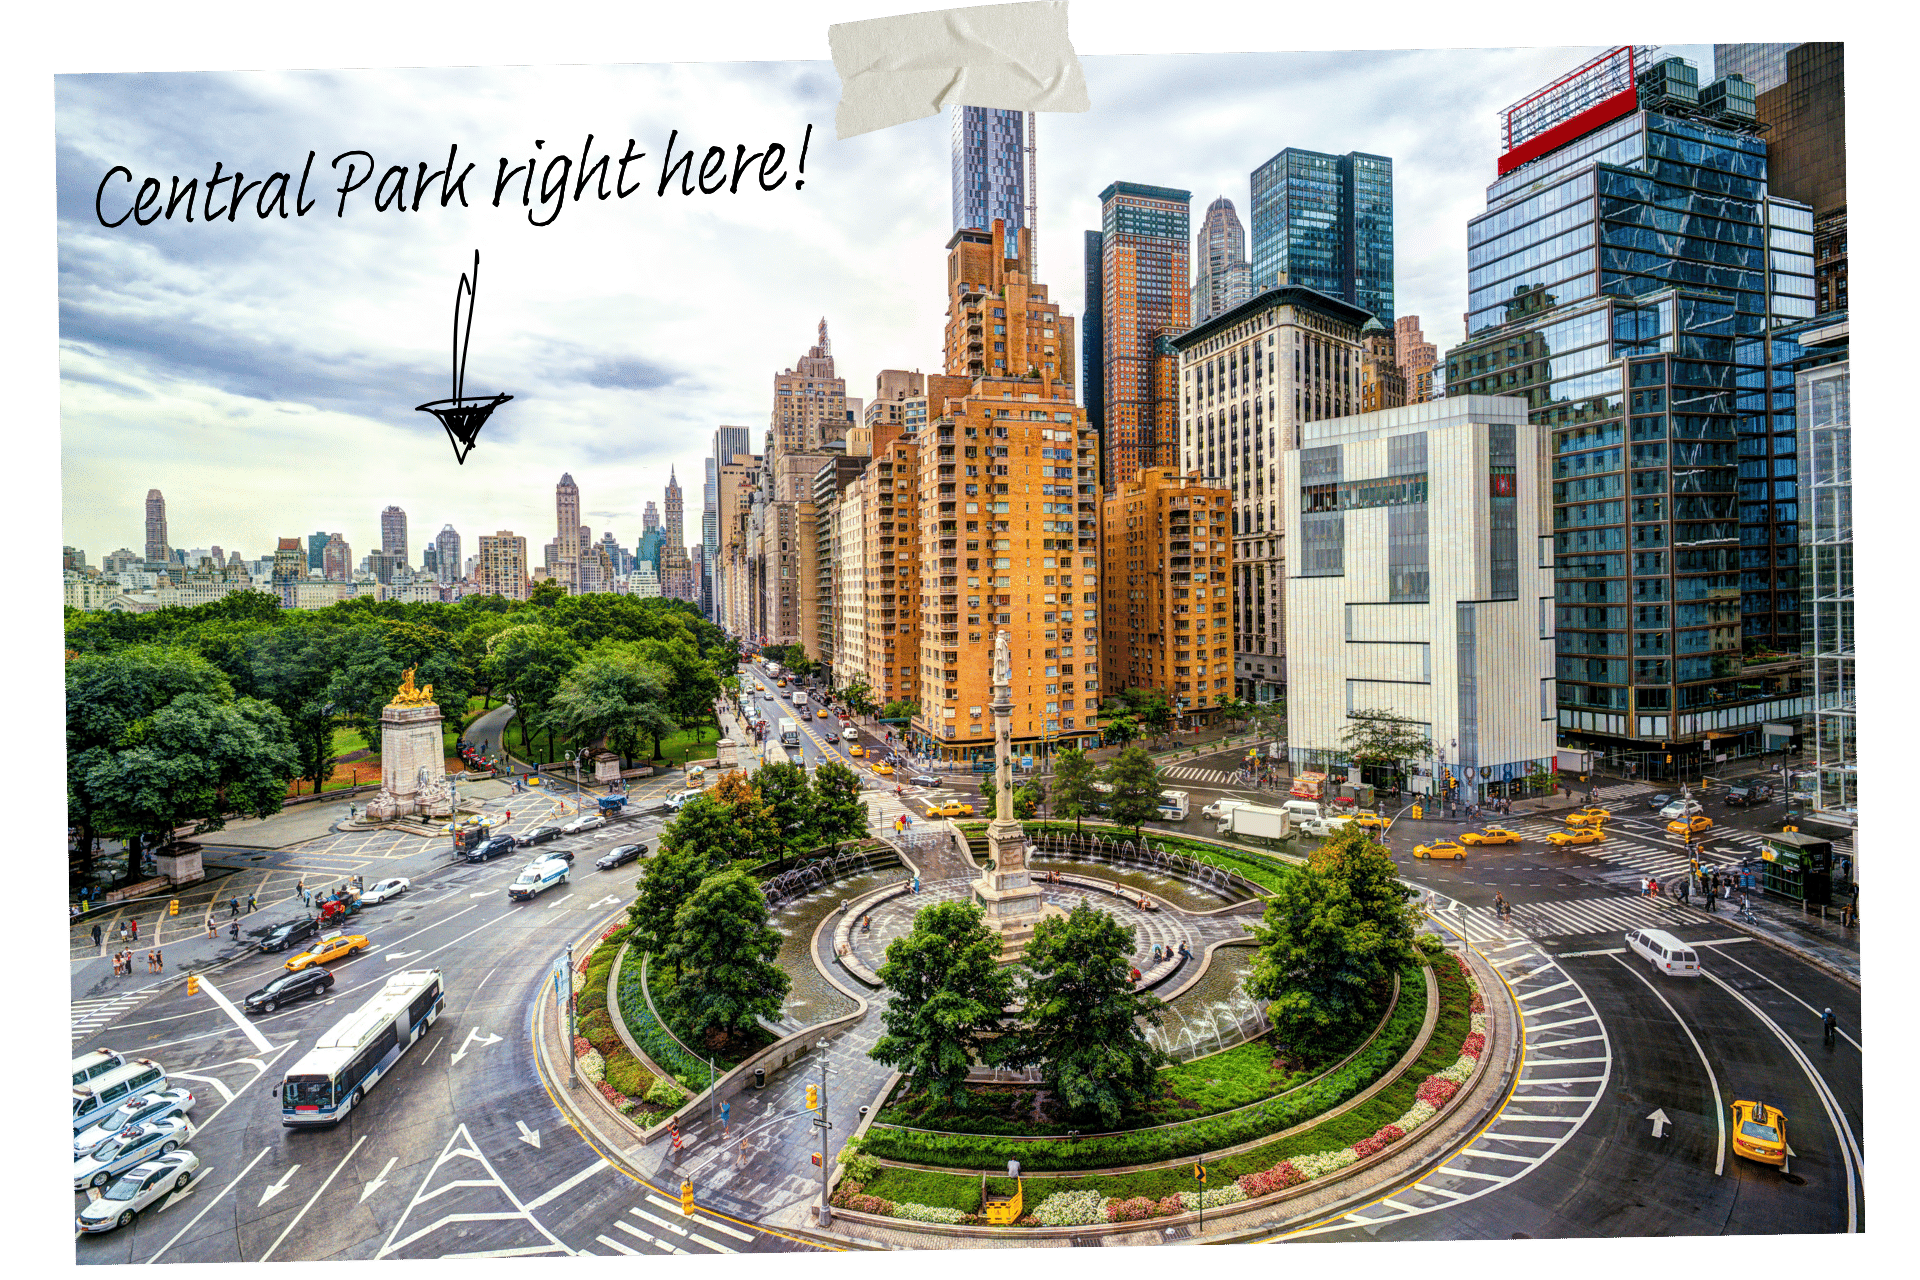 Colombus Circle has a bunch of NYC's must-visit stores. Image shows a circular roundaout lined with trees and shrubbery and surrounded by high-rises to the right right, and Central Park to the left.